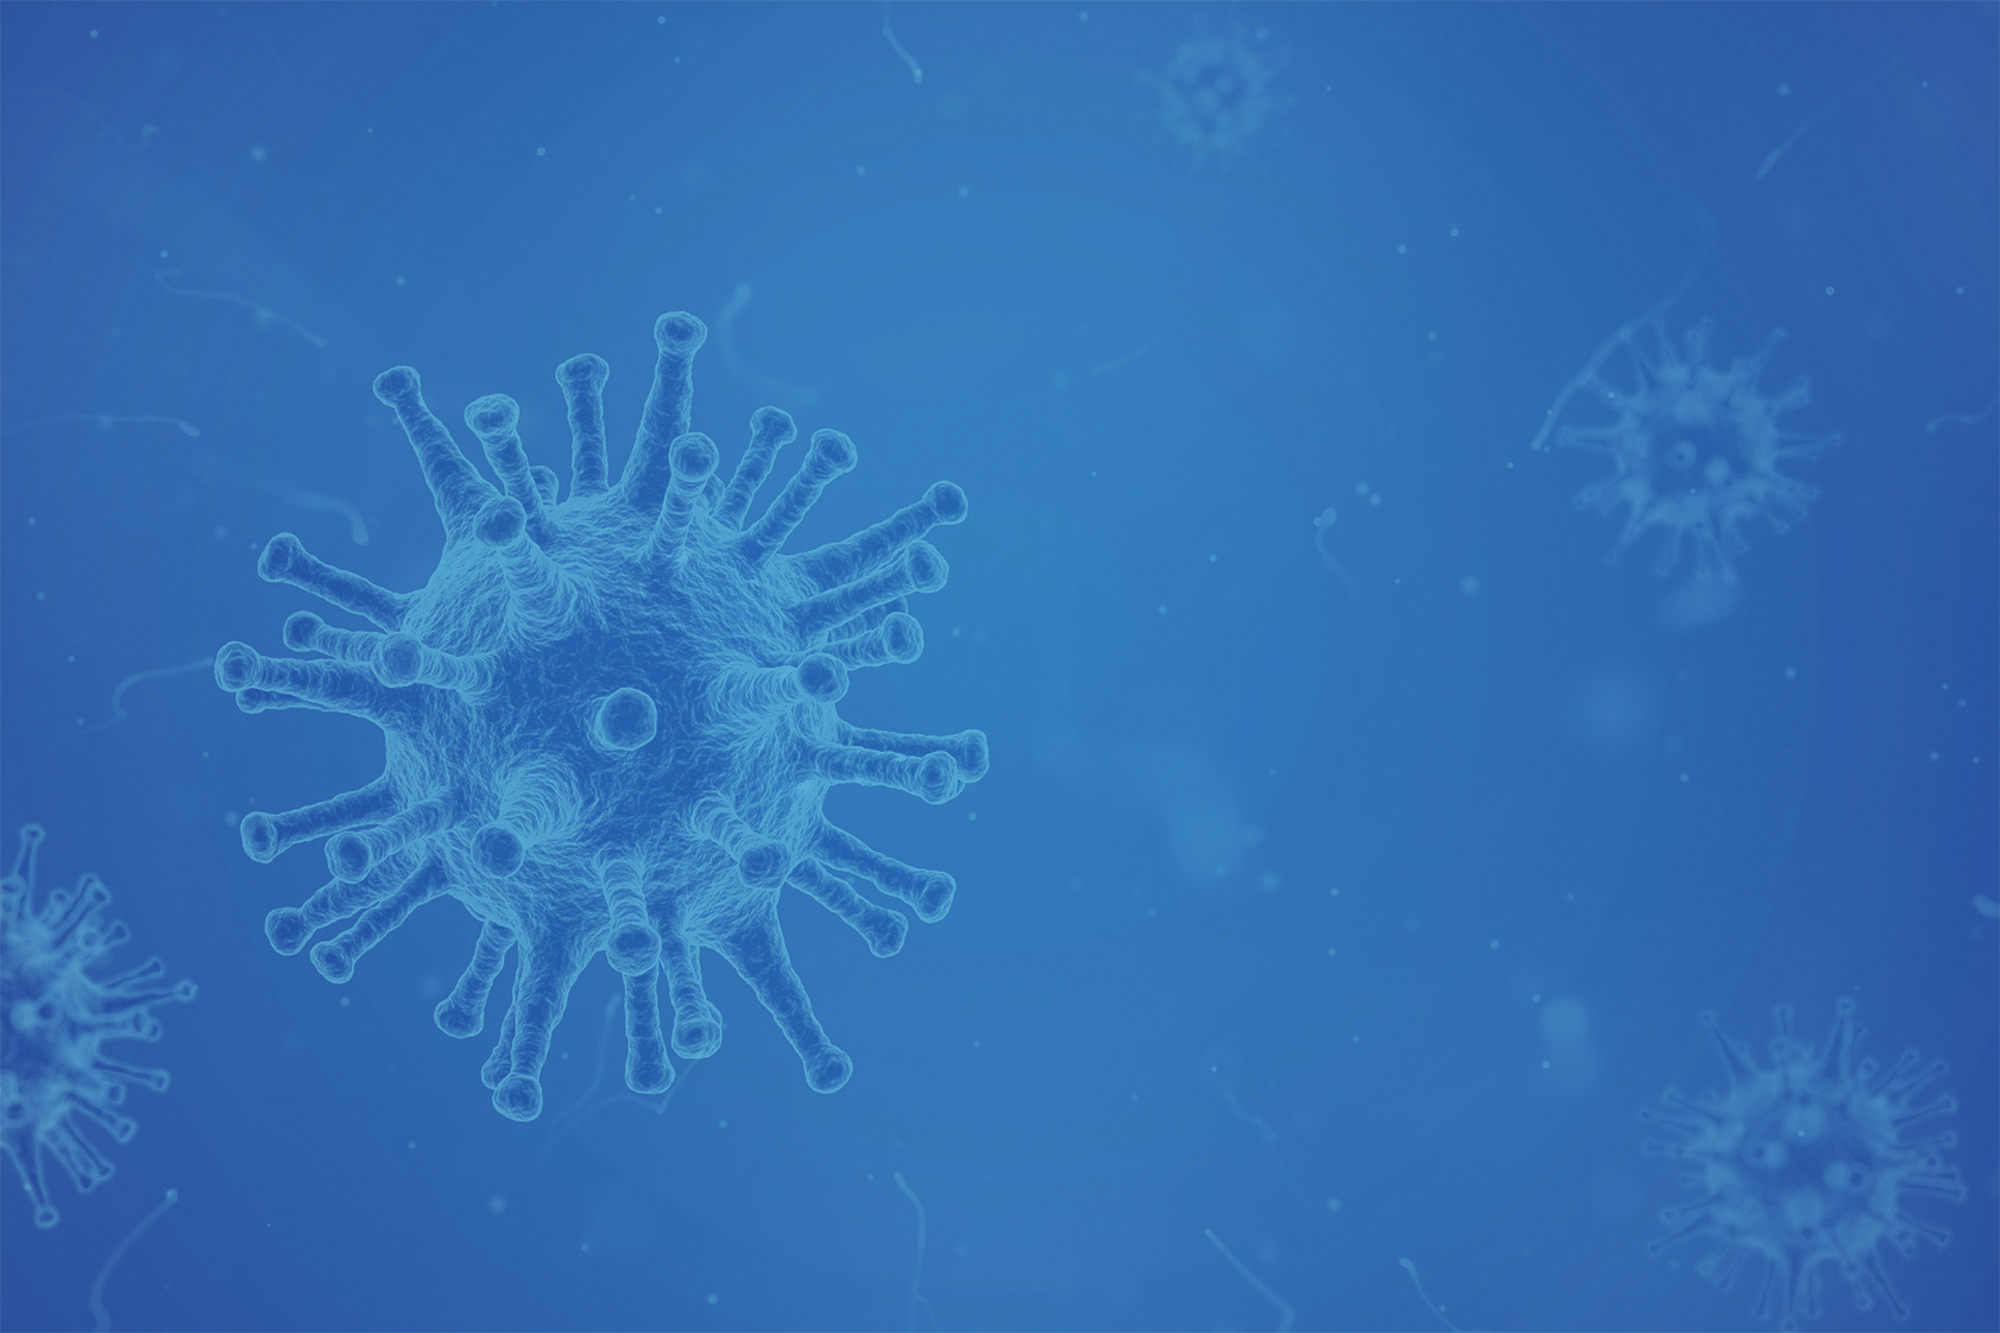 FEATURED BLOG - The Financial Impact of the Coronavirus (COVID-19)